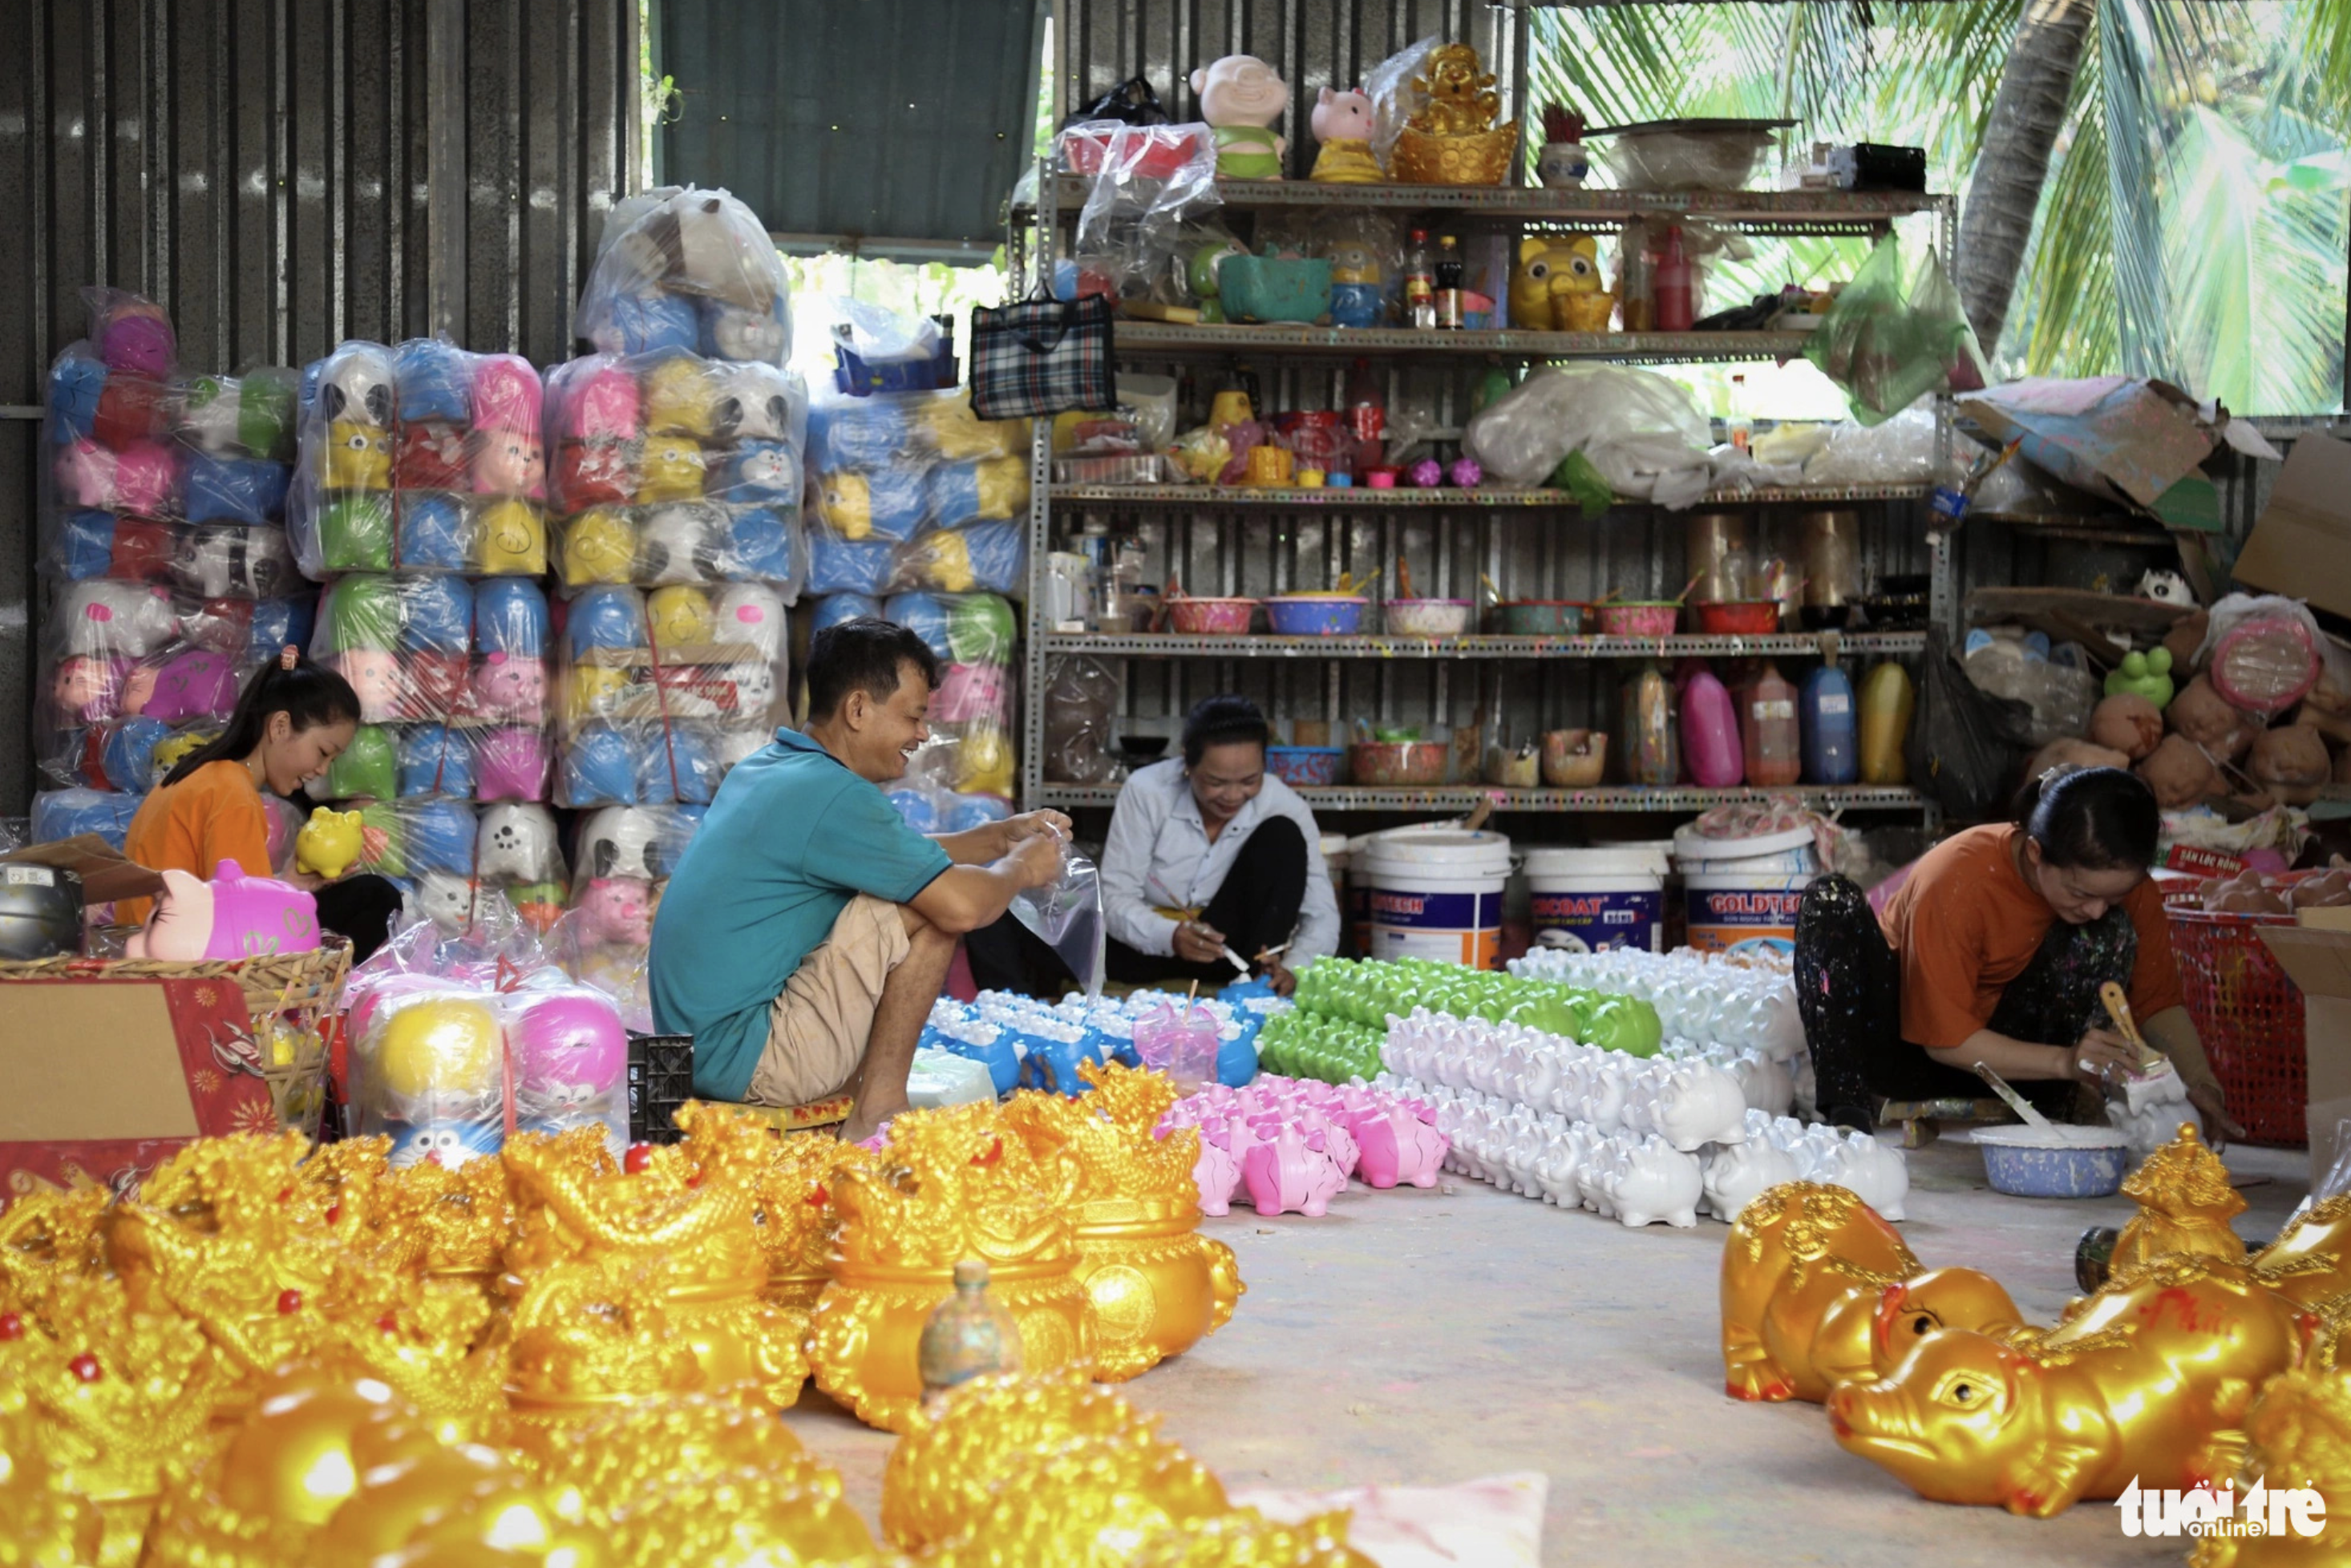 When the Tet holiday nears, the Lai Thieu piggy bank making village is bustling. Photo: P.Q. / Tuoi Tre